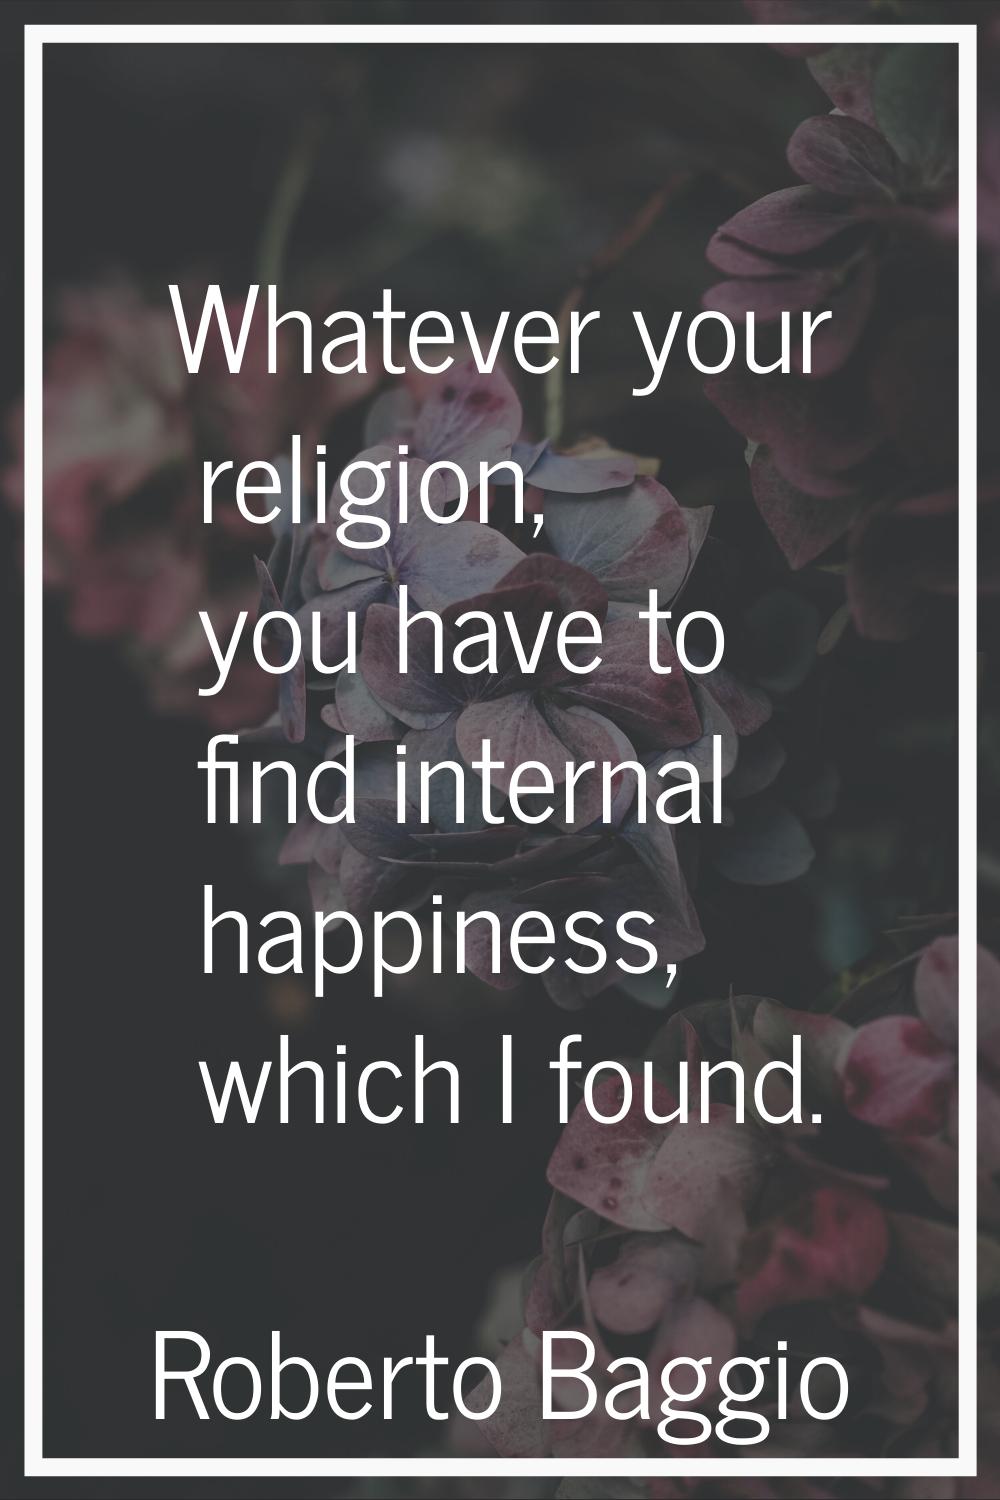 Whatever your religion, you have to find internal happiness, which I found.